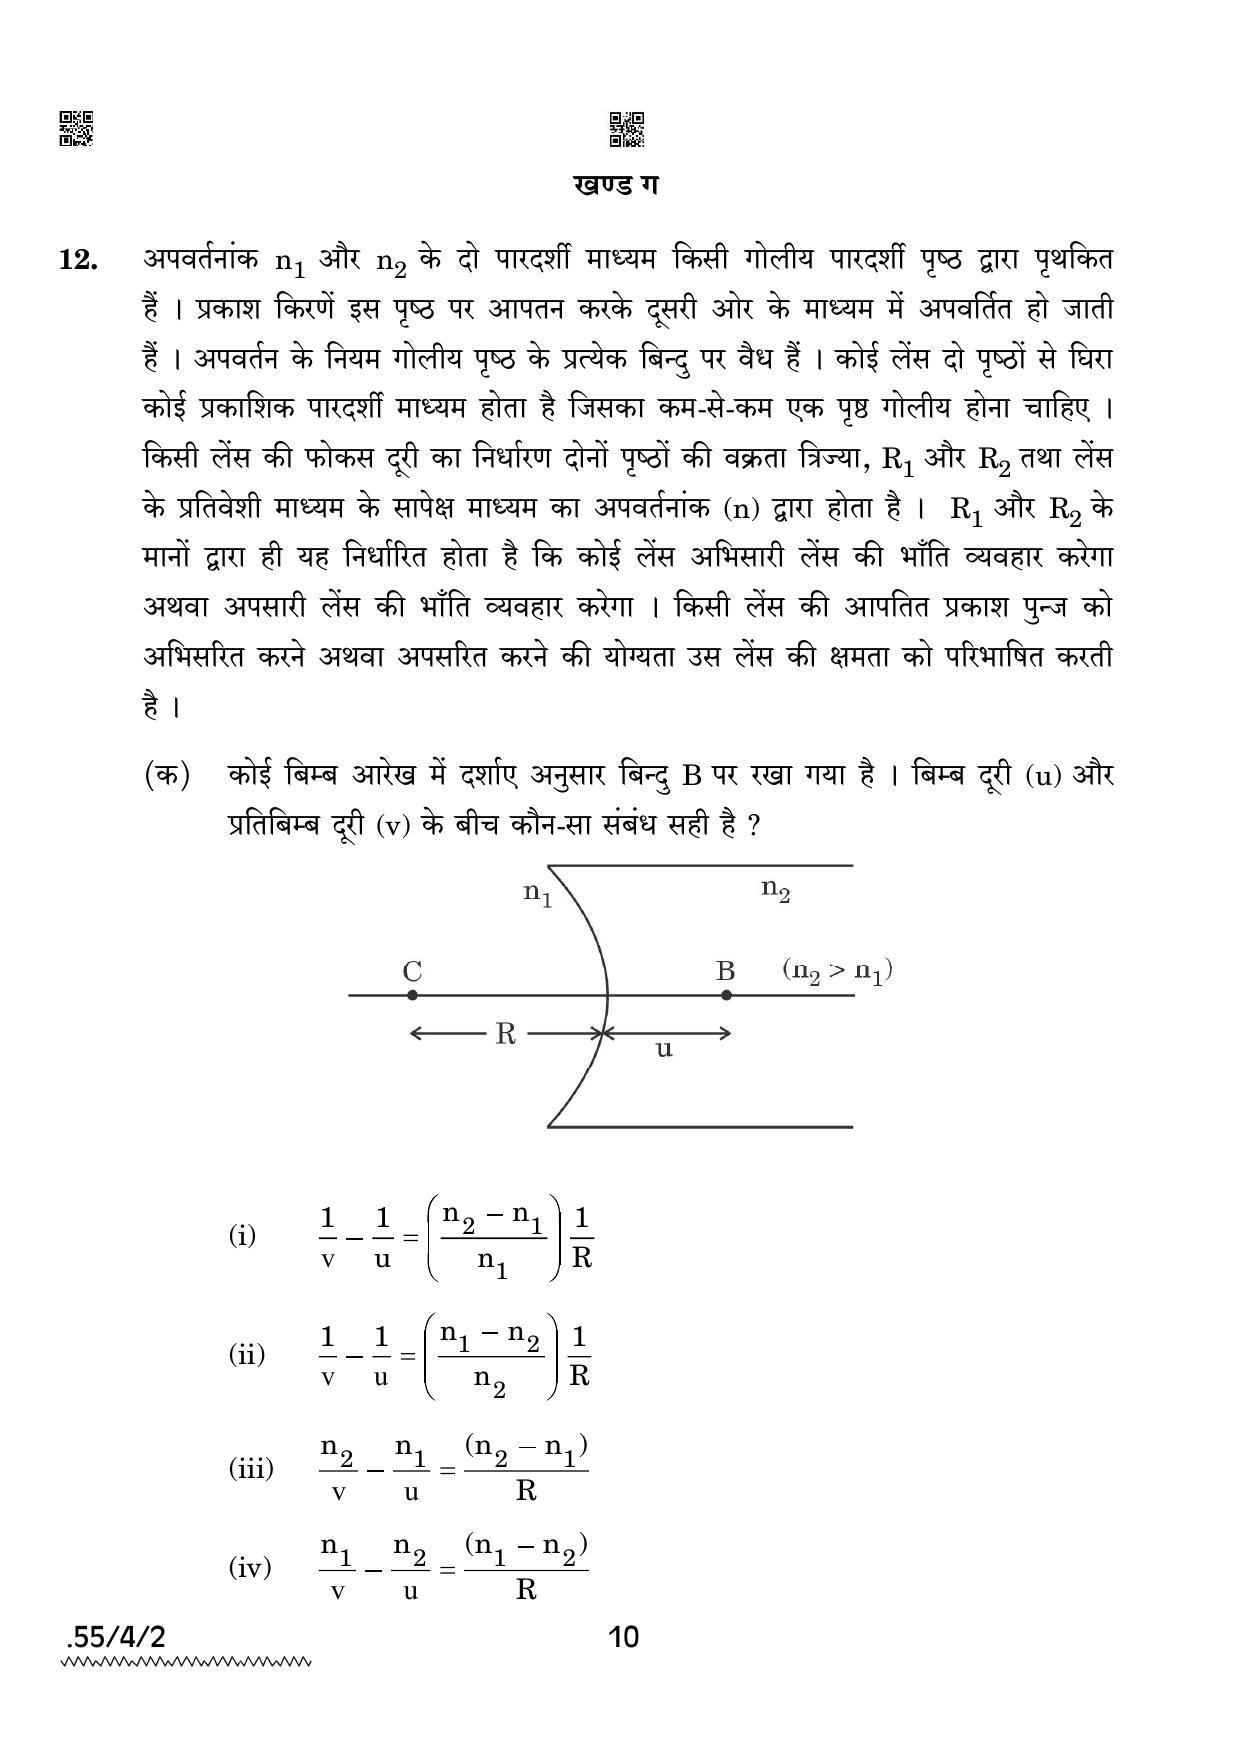 CBSE Class 12 55-4-2 Physics 2022 Question Paper - Page 10